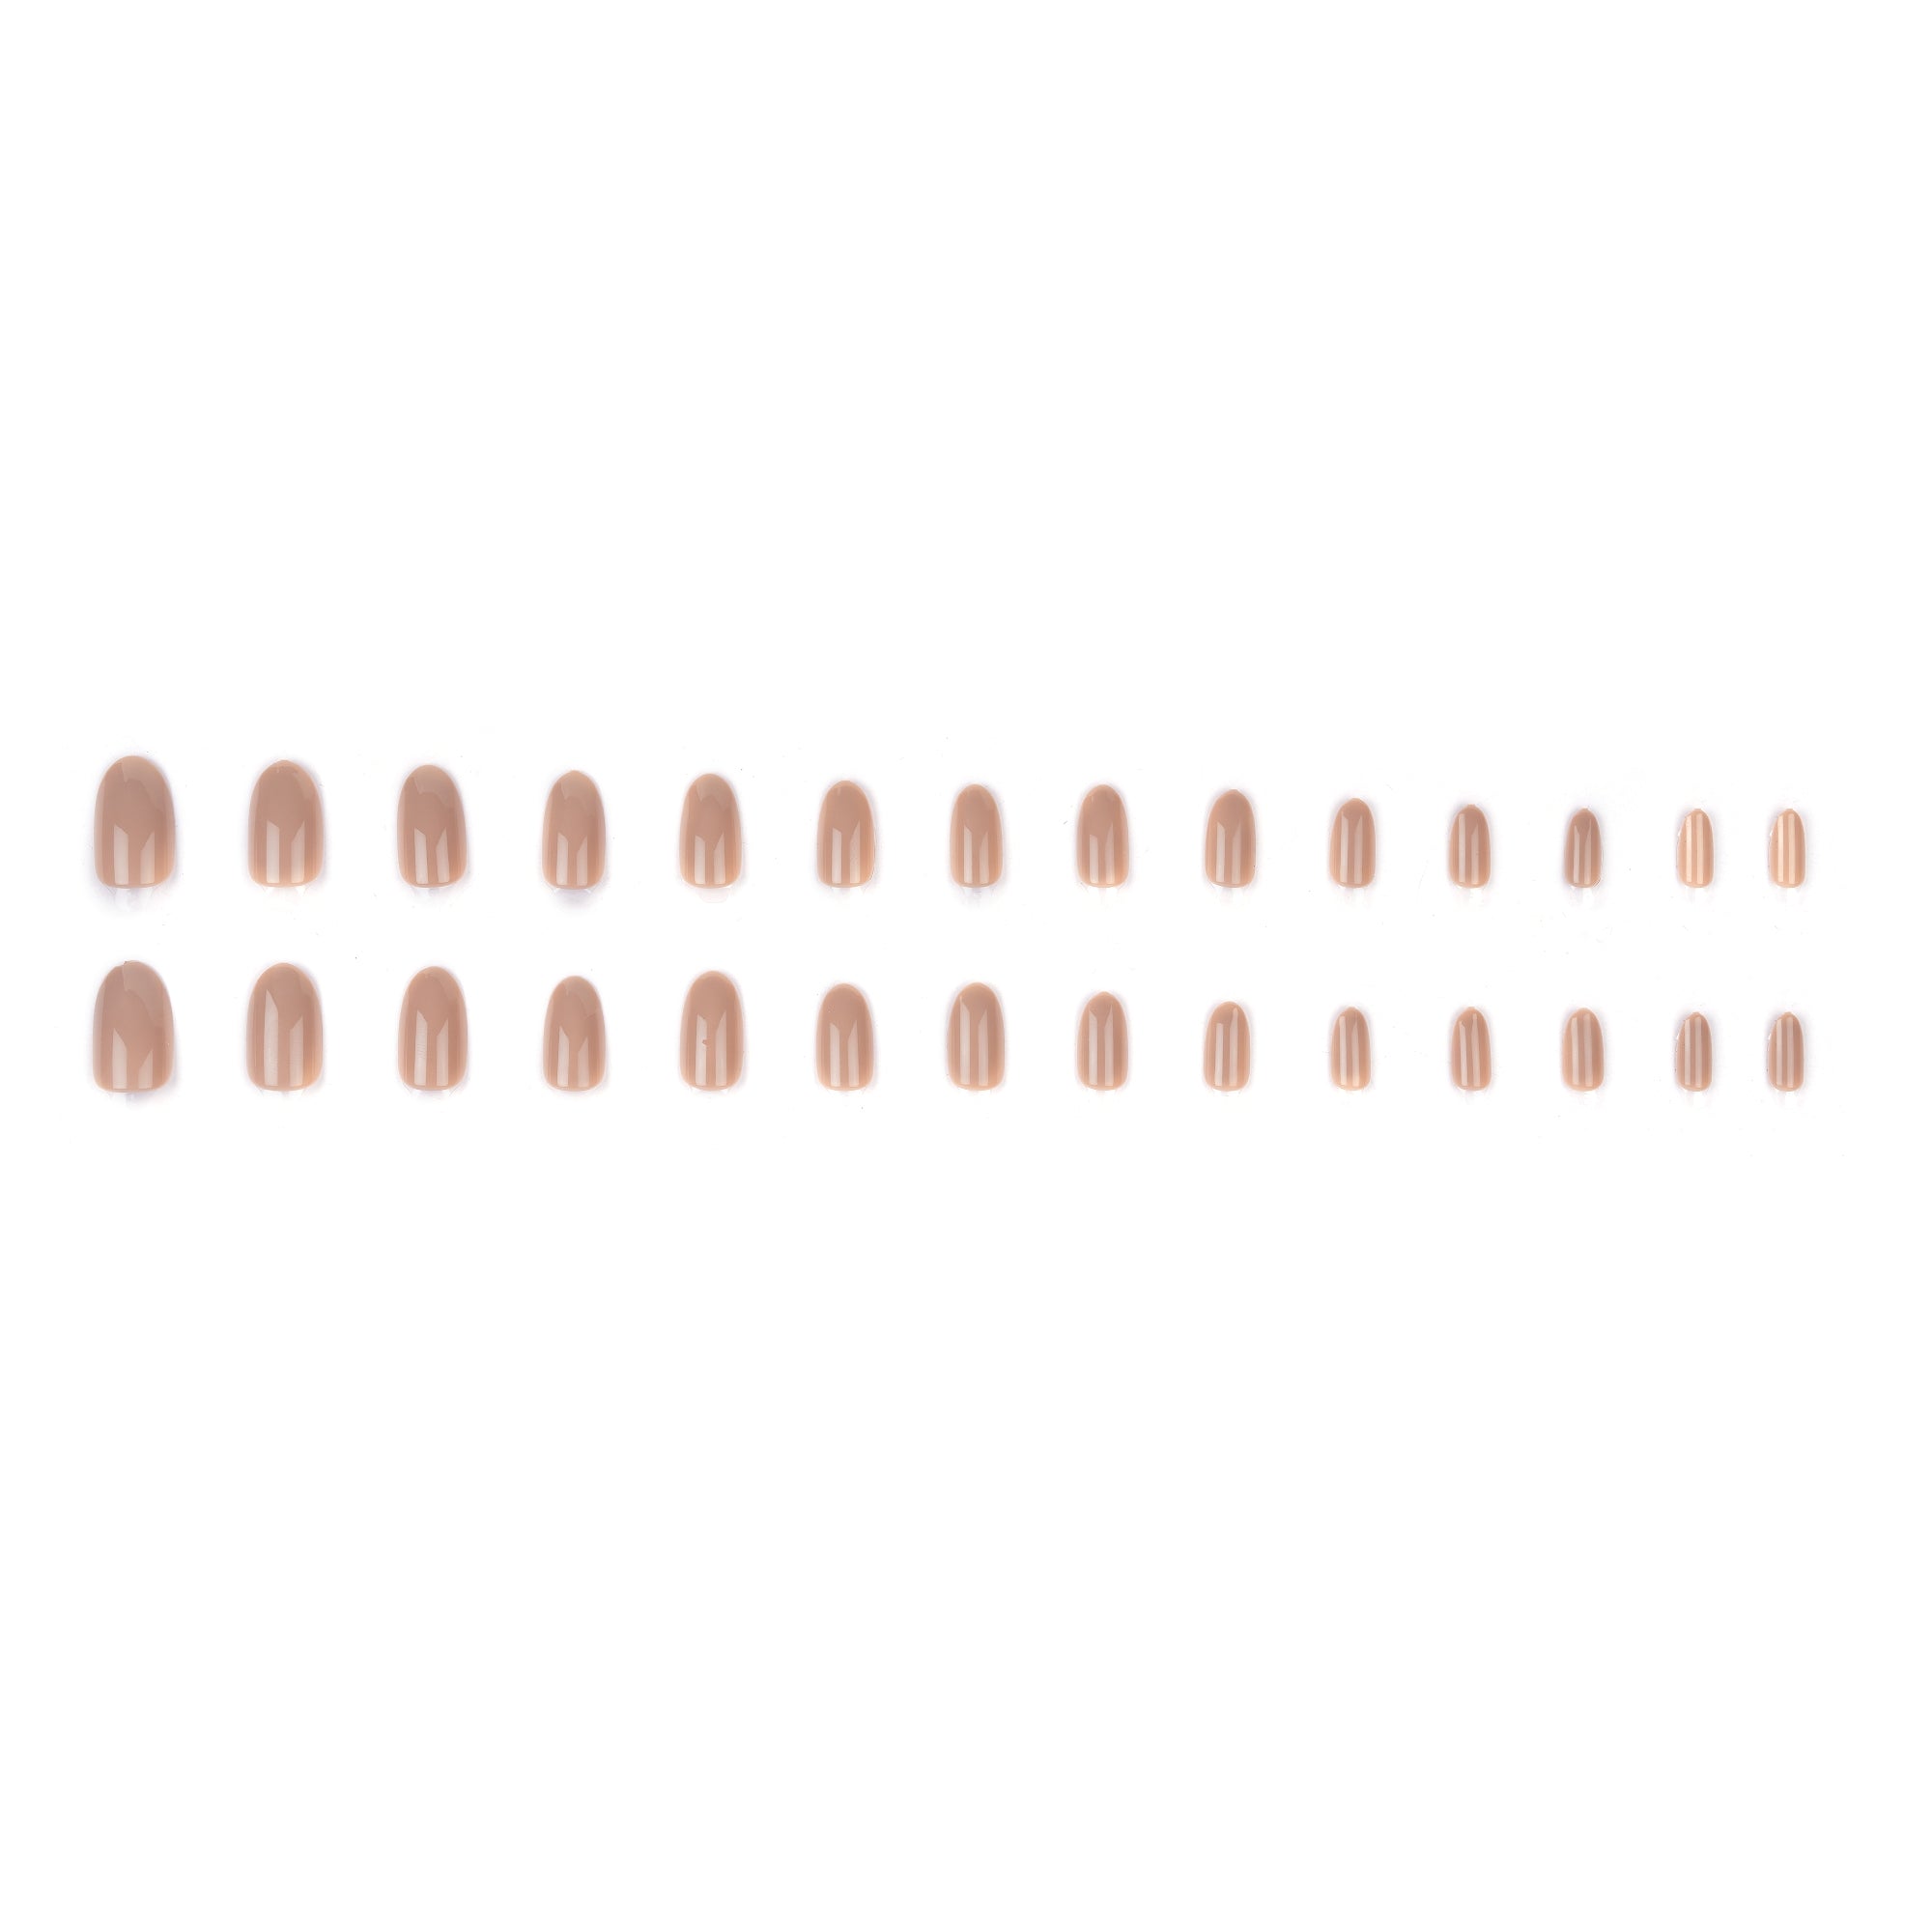 Lick Nails 28 Pcs Rose Beige Almond Shape Acrylic Press on Nails With Application Kit